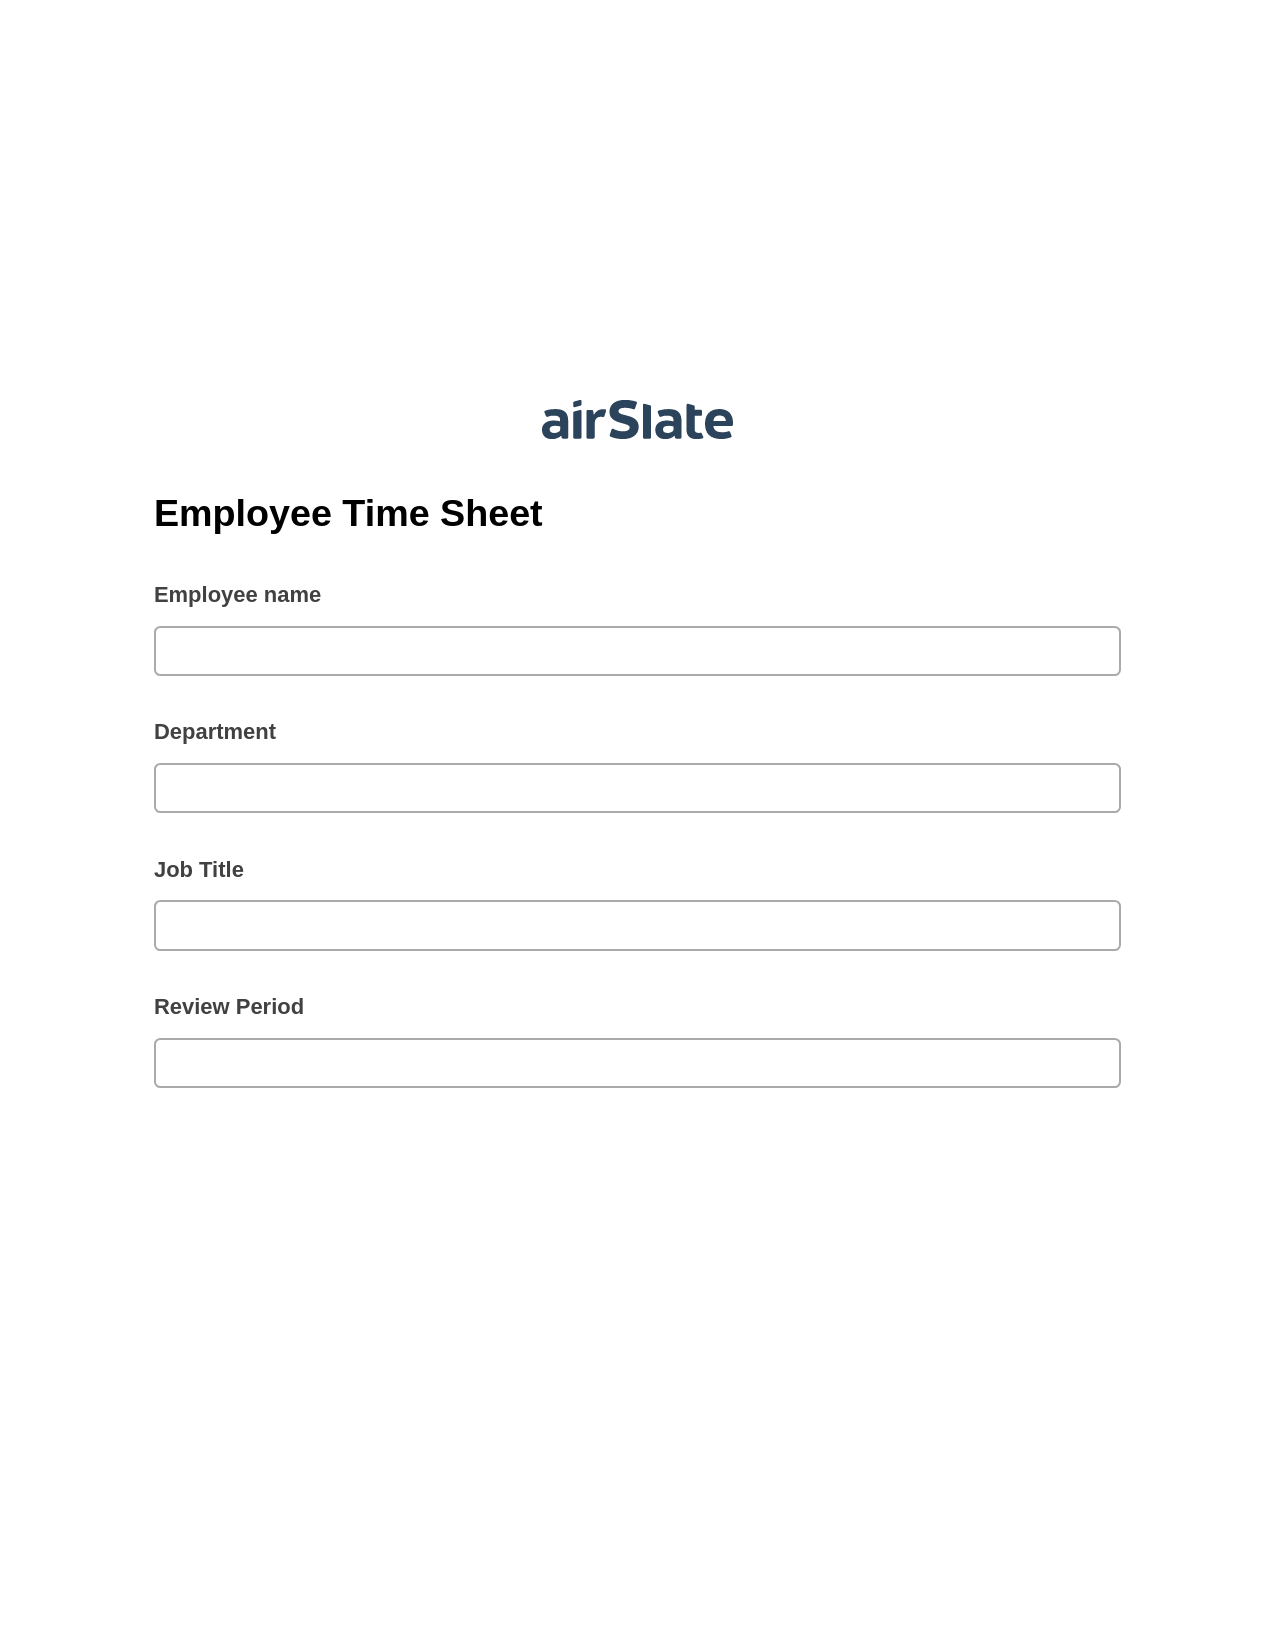 Employee Time Sheet Pre-fill Dropdowns from Airtable, System Bot - Create a Slate in another Flow, Slack Two-Way Binding Bot